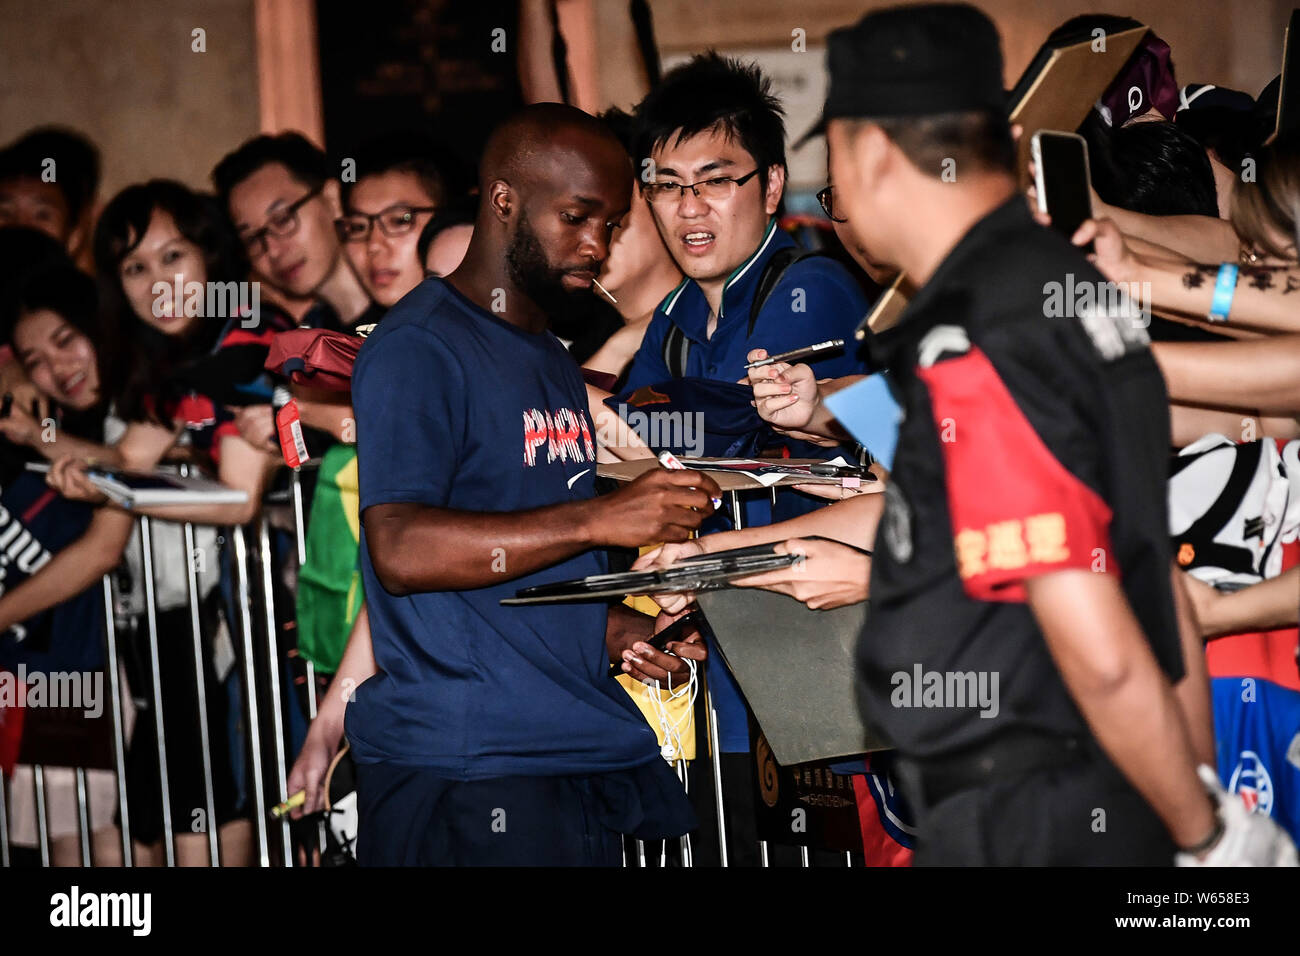 Lassana Diarra signs autographs for fans as he and teammates of Paris Saint-Germain leave the hotel for an event for Trophee des Champions 2018 in She Stock Photo